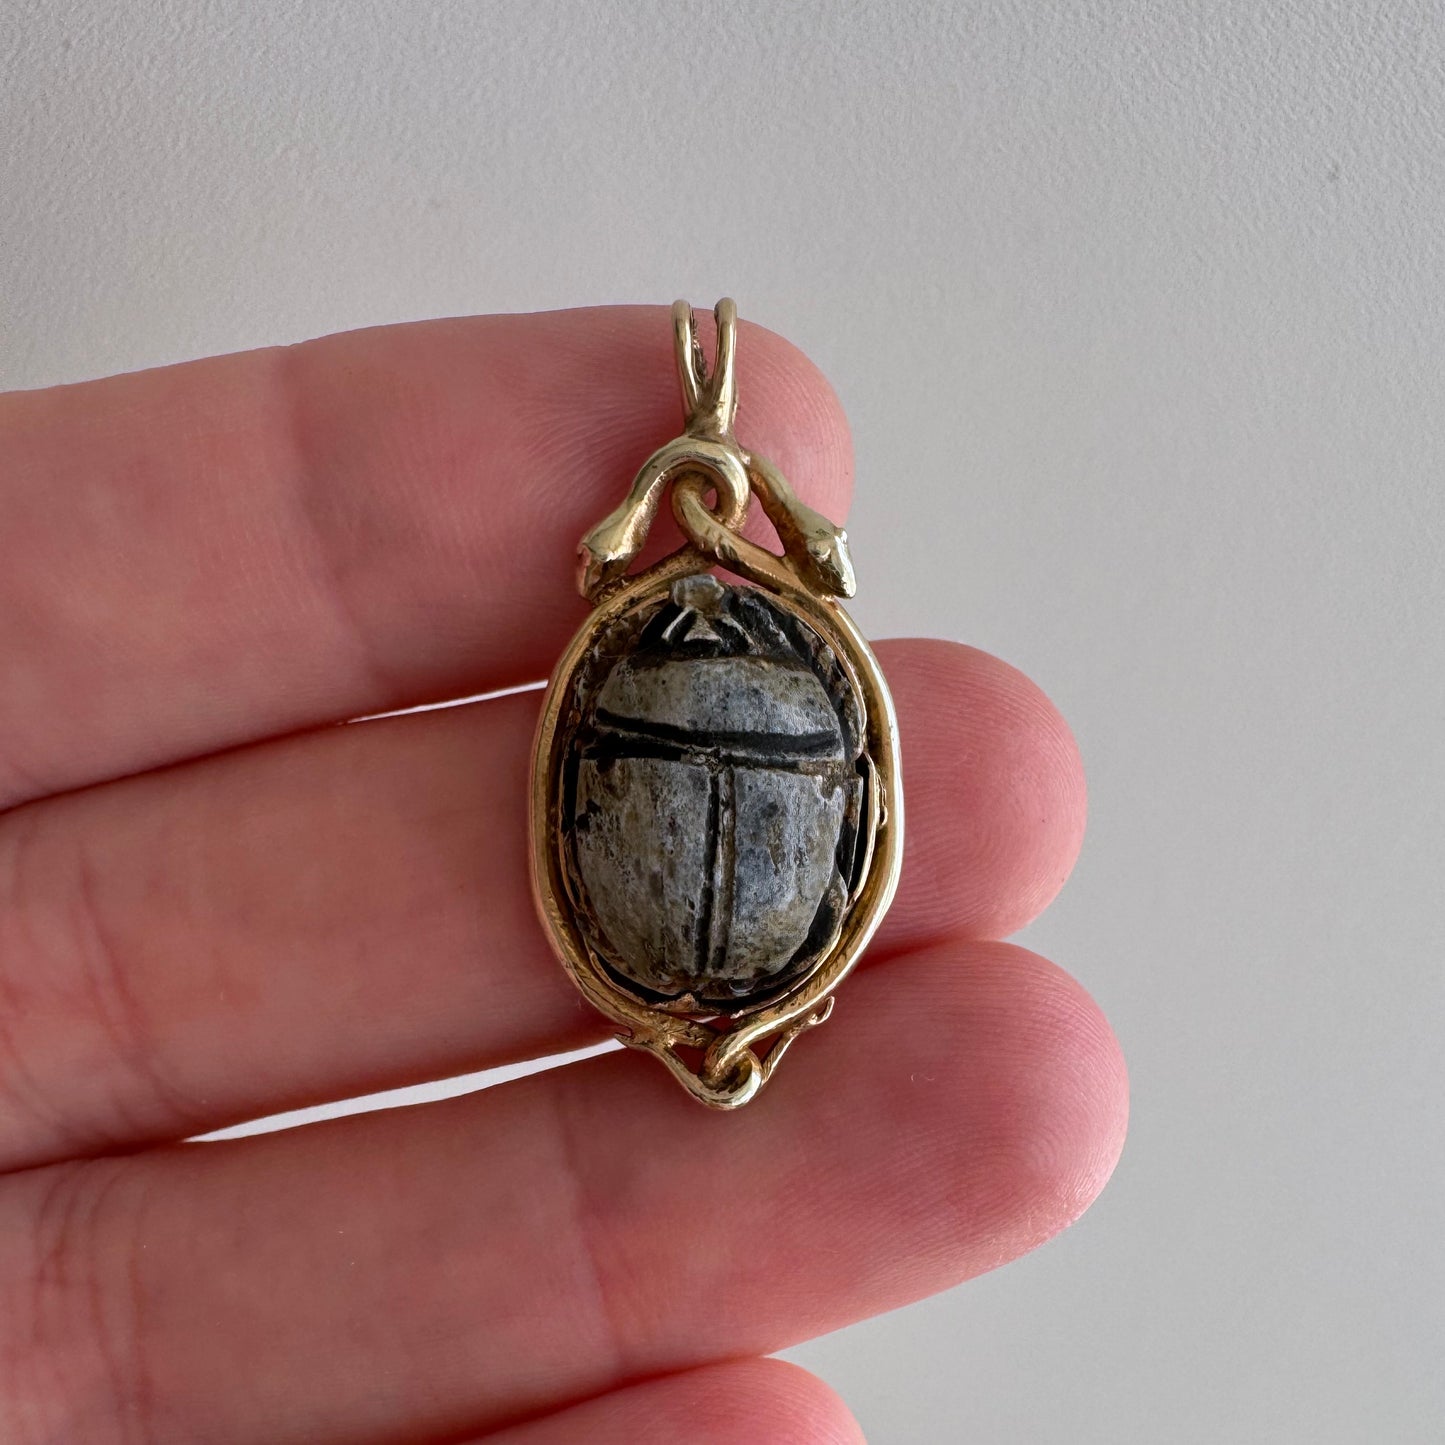 reworked A N T I Q U E // protected beetle / 14k and faience scarab and snakes / a vintage conversion pendant